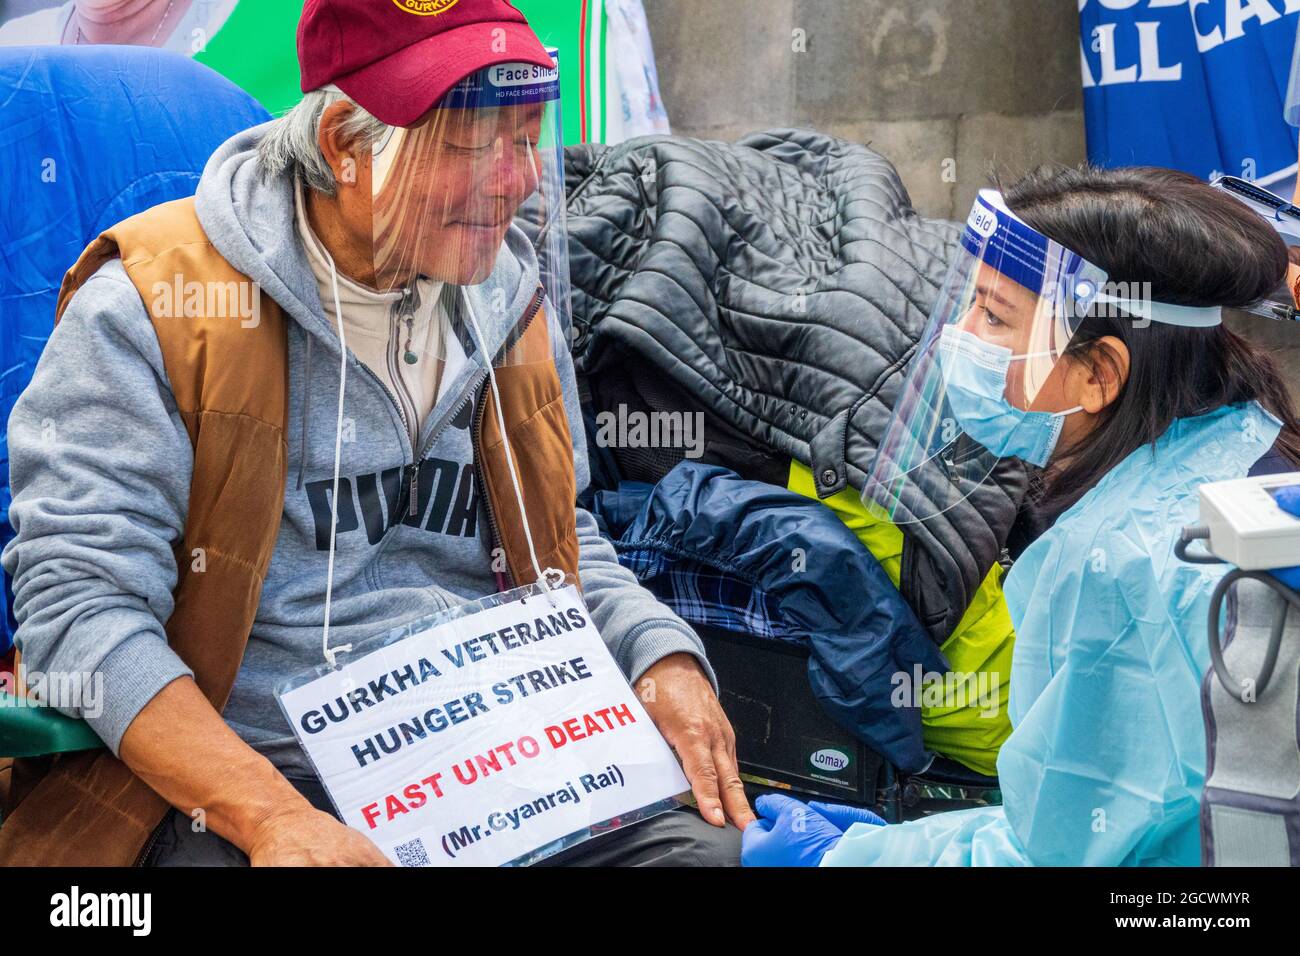 London, UK. 10th August 2021. Nurses attend to Mr Gyanraj Rai to ensure his medical welfare during hunger strike. British Gurkha veterans on hunger strike outside 10 Downing Street demanding equal pension rights and recognition from Boris Johnson at their service for the UK. Stock Photo